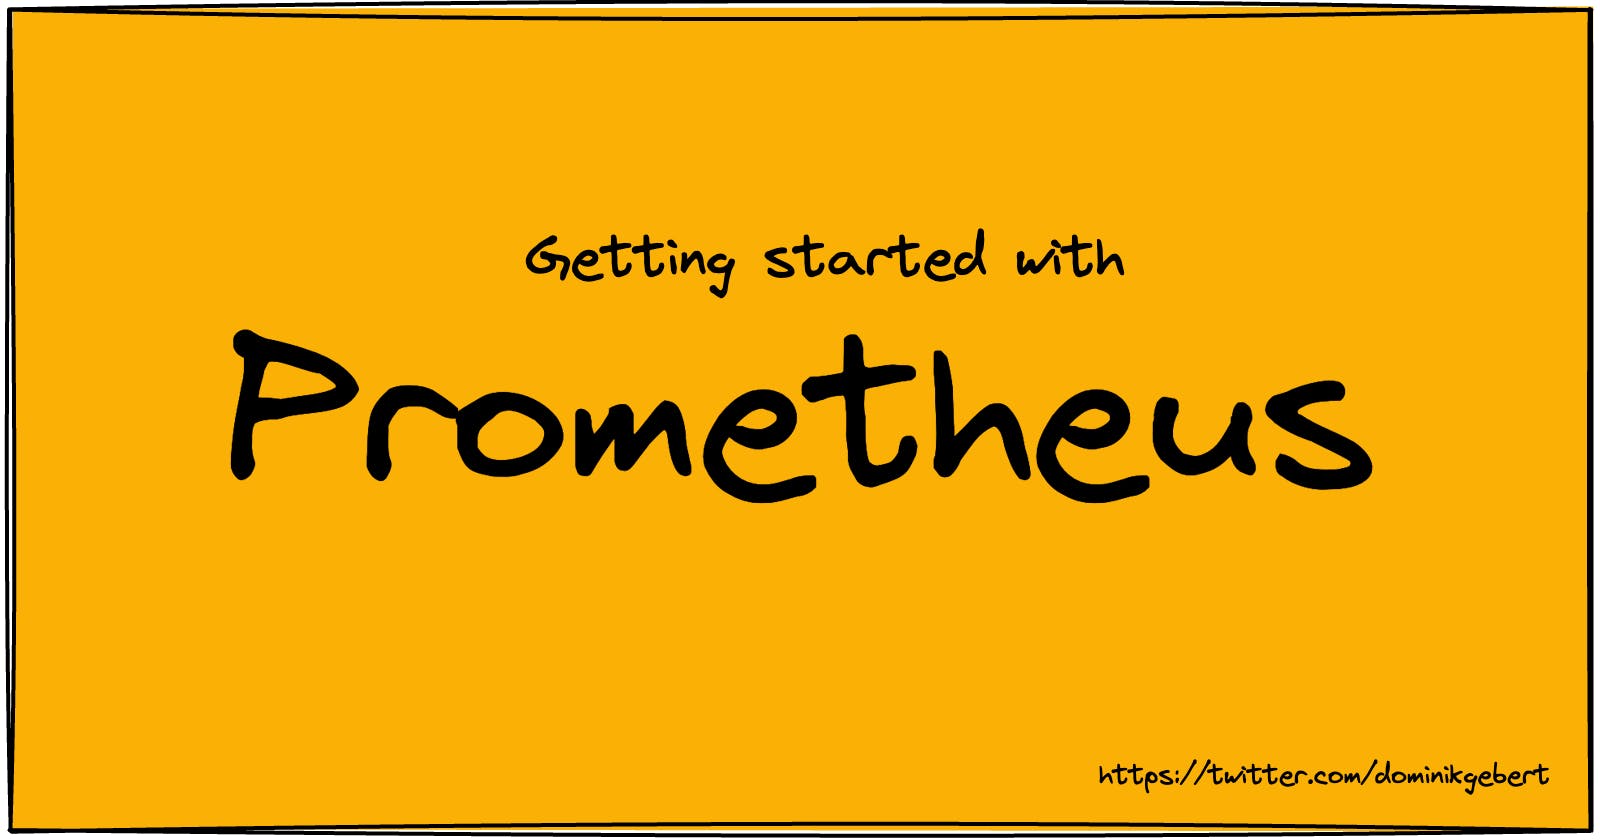 Getting started with Prometheus